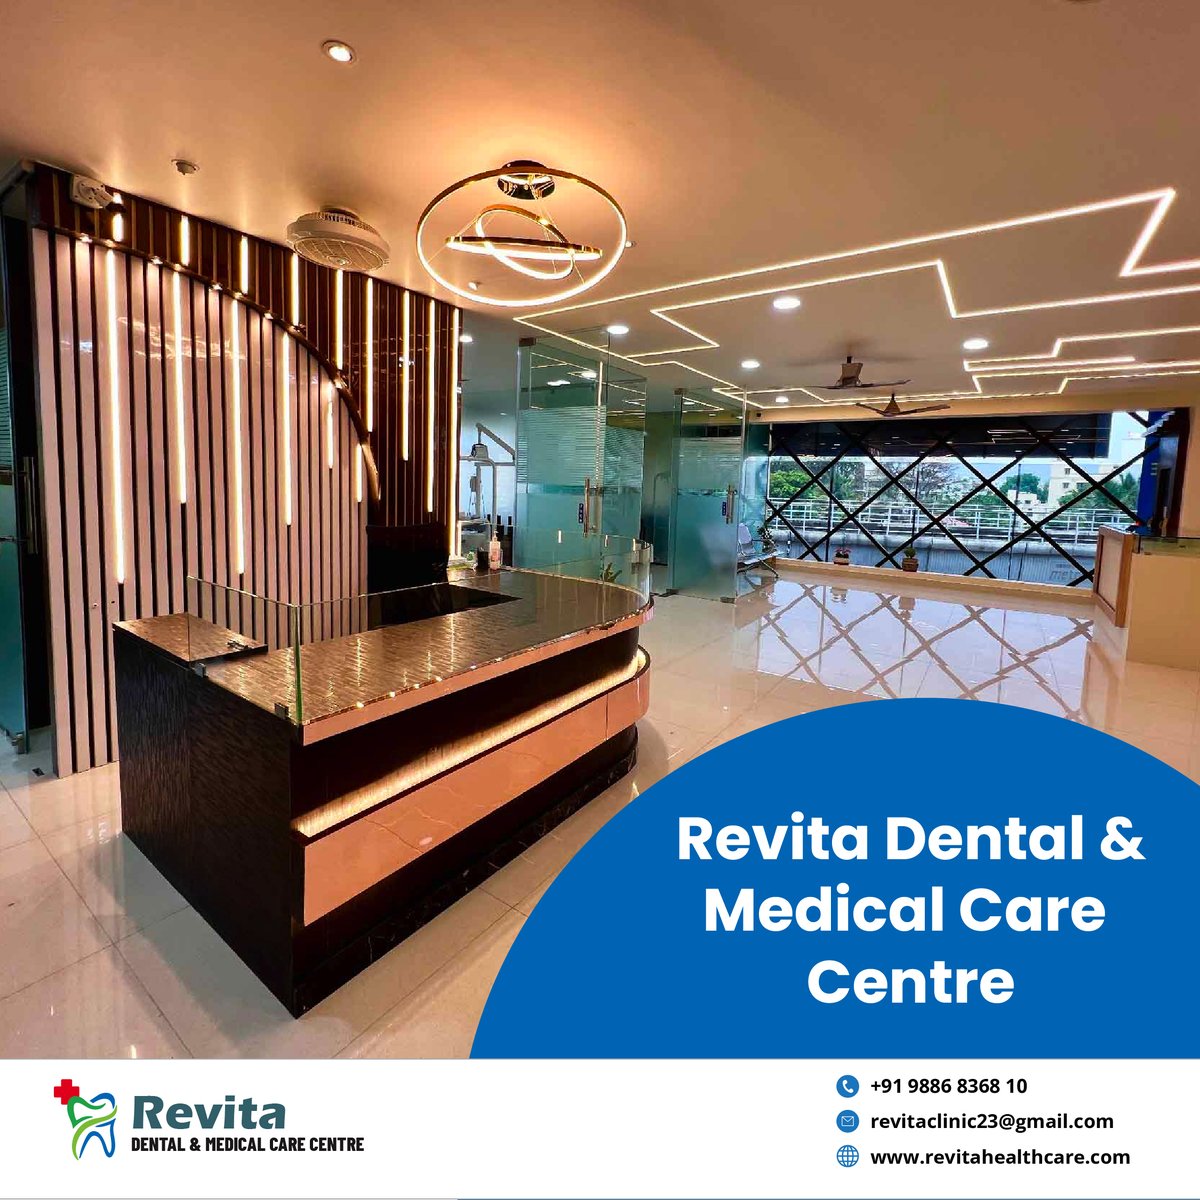 At Revita Dental & Medical Care Centre, our priority is to provide top-notch dentistry and ENT services to our patients.

Call us to Book an Appointment: +91 98868 36810 Visit

#RevitaDentalClinic #ExceptionalCare #BangaloreDentist #BangaloreDentalClinic